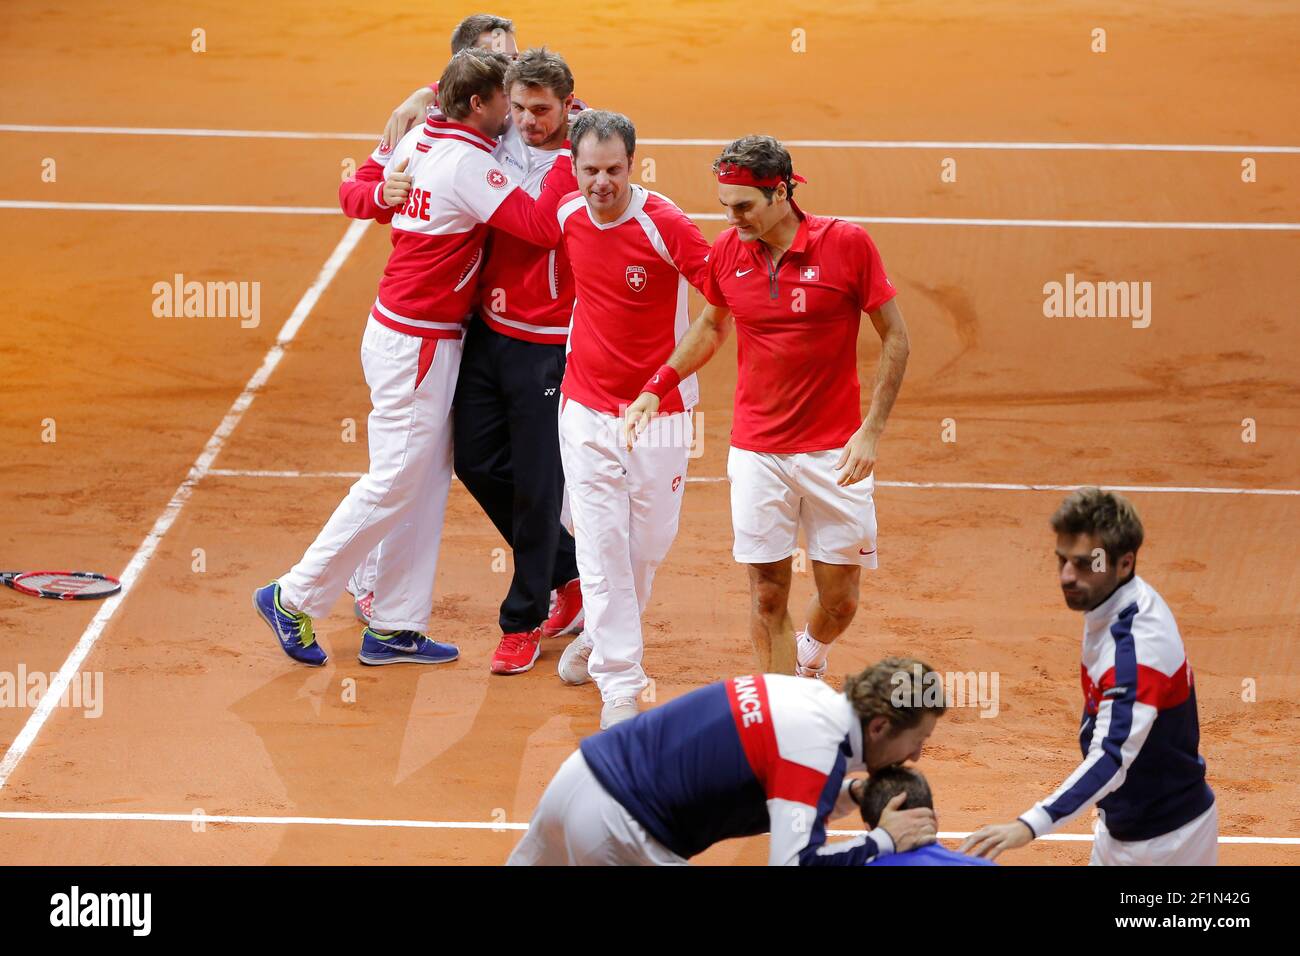 Roger Federer (SUI) and Swiss Captain Severin Luthi with Stanislas Wawrinka  (SUI) and team celebrated the victory, Lionel Roux (FRA) and Arnaud Clement  (FRA) gave confort to Richard Gasquet (FRA) during the